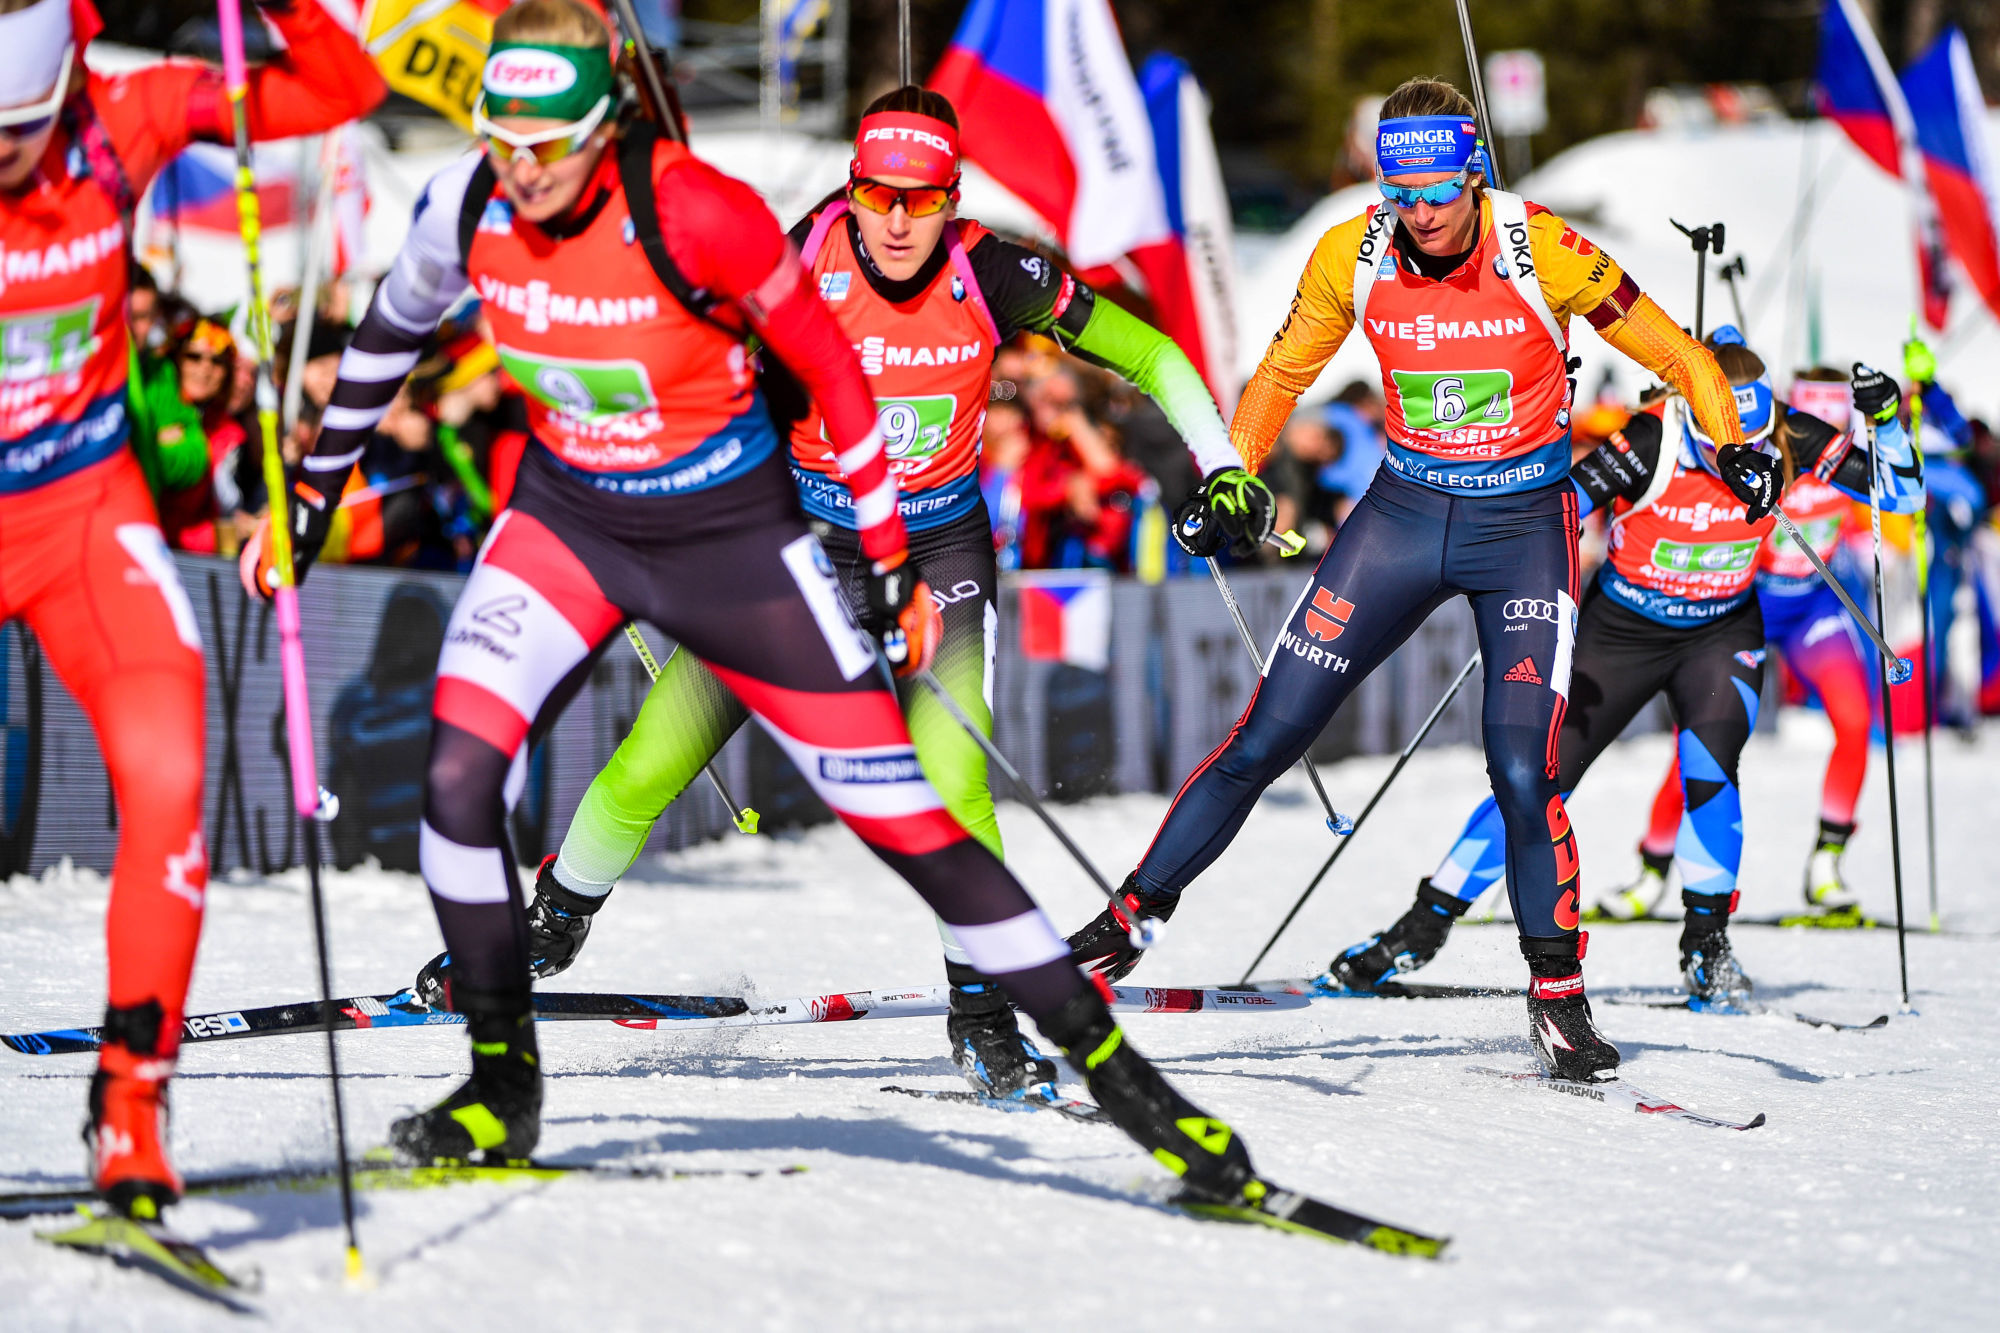 22 February 2020, Italy, Antholz: Biathlon: World Championship/World Cup, relay 4 x 6 km, women in the Arena Alto Adige. Vanessa Hinz (3rd from right) from Germany in action. Photo: Hendrik Schmidt/dpa 

Photo by Icon Sport - Antholz - Anterselva (Italie)